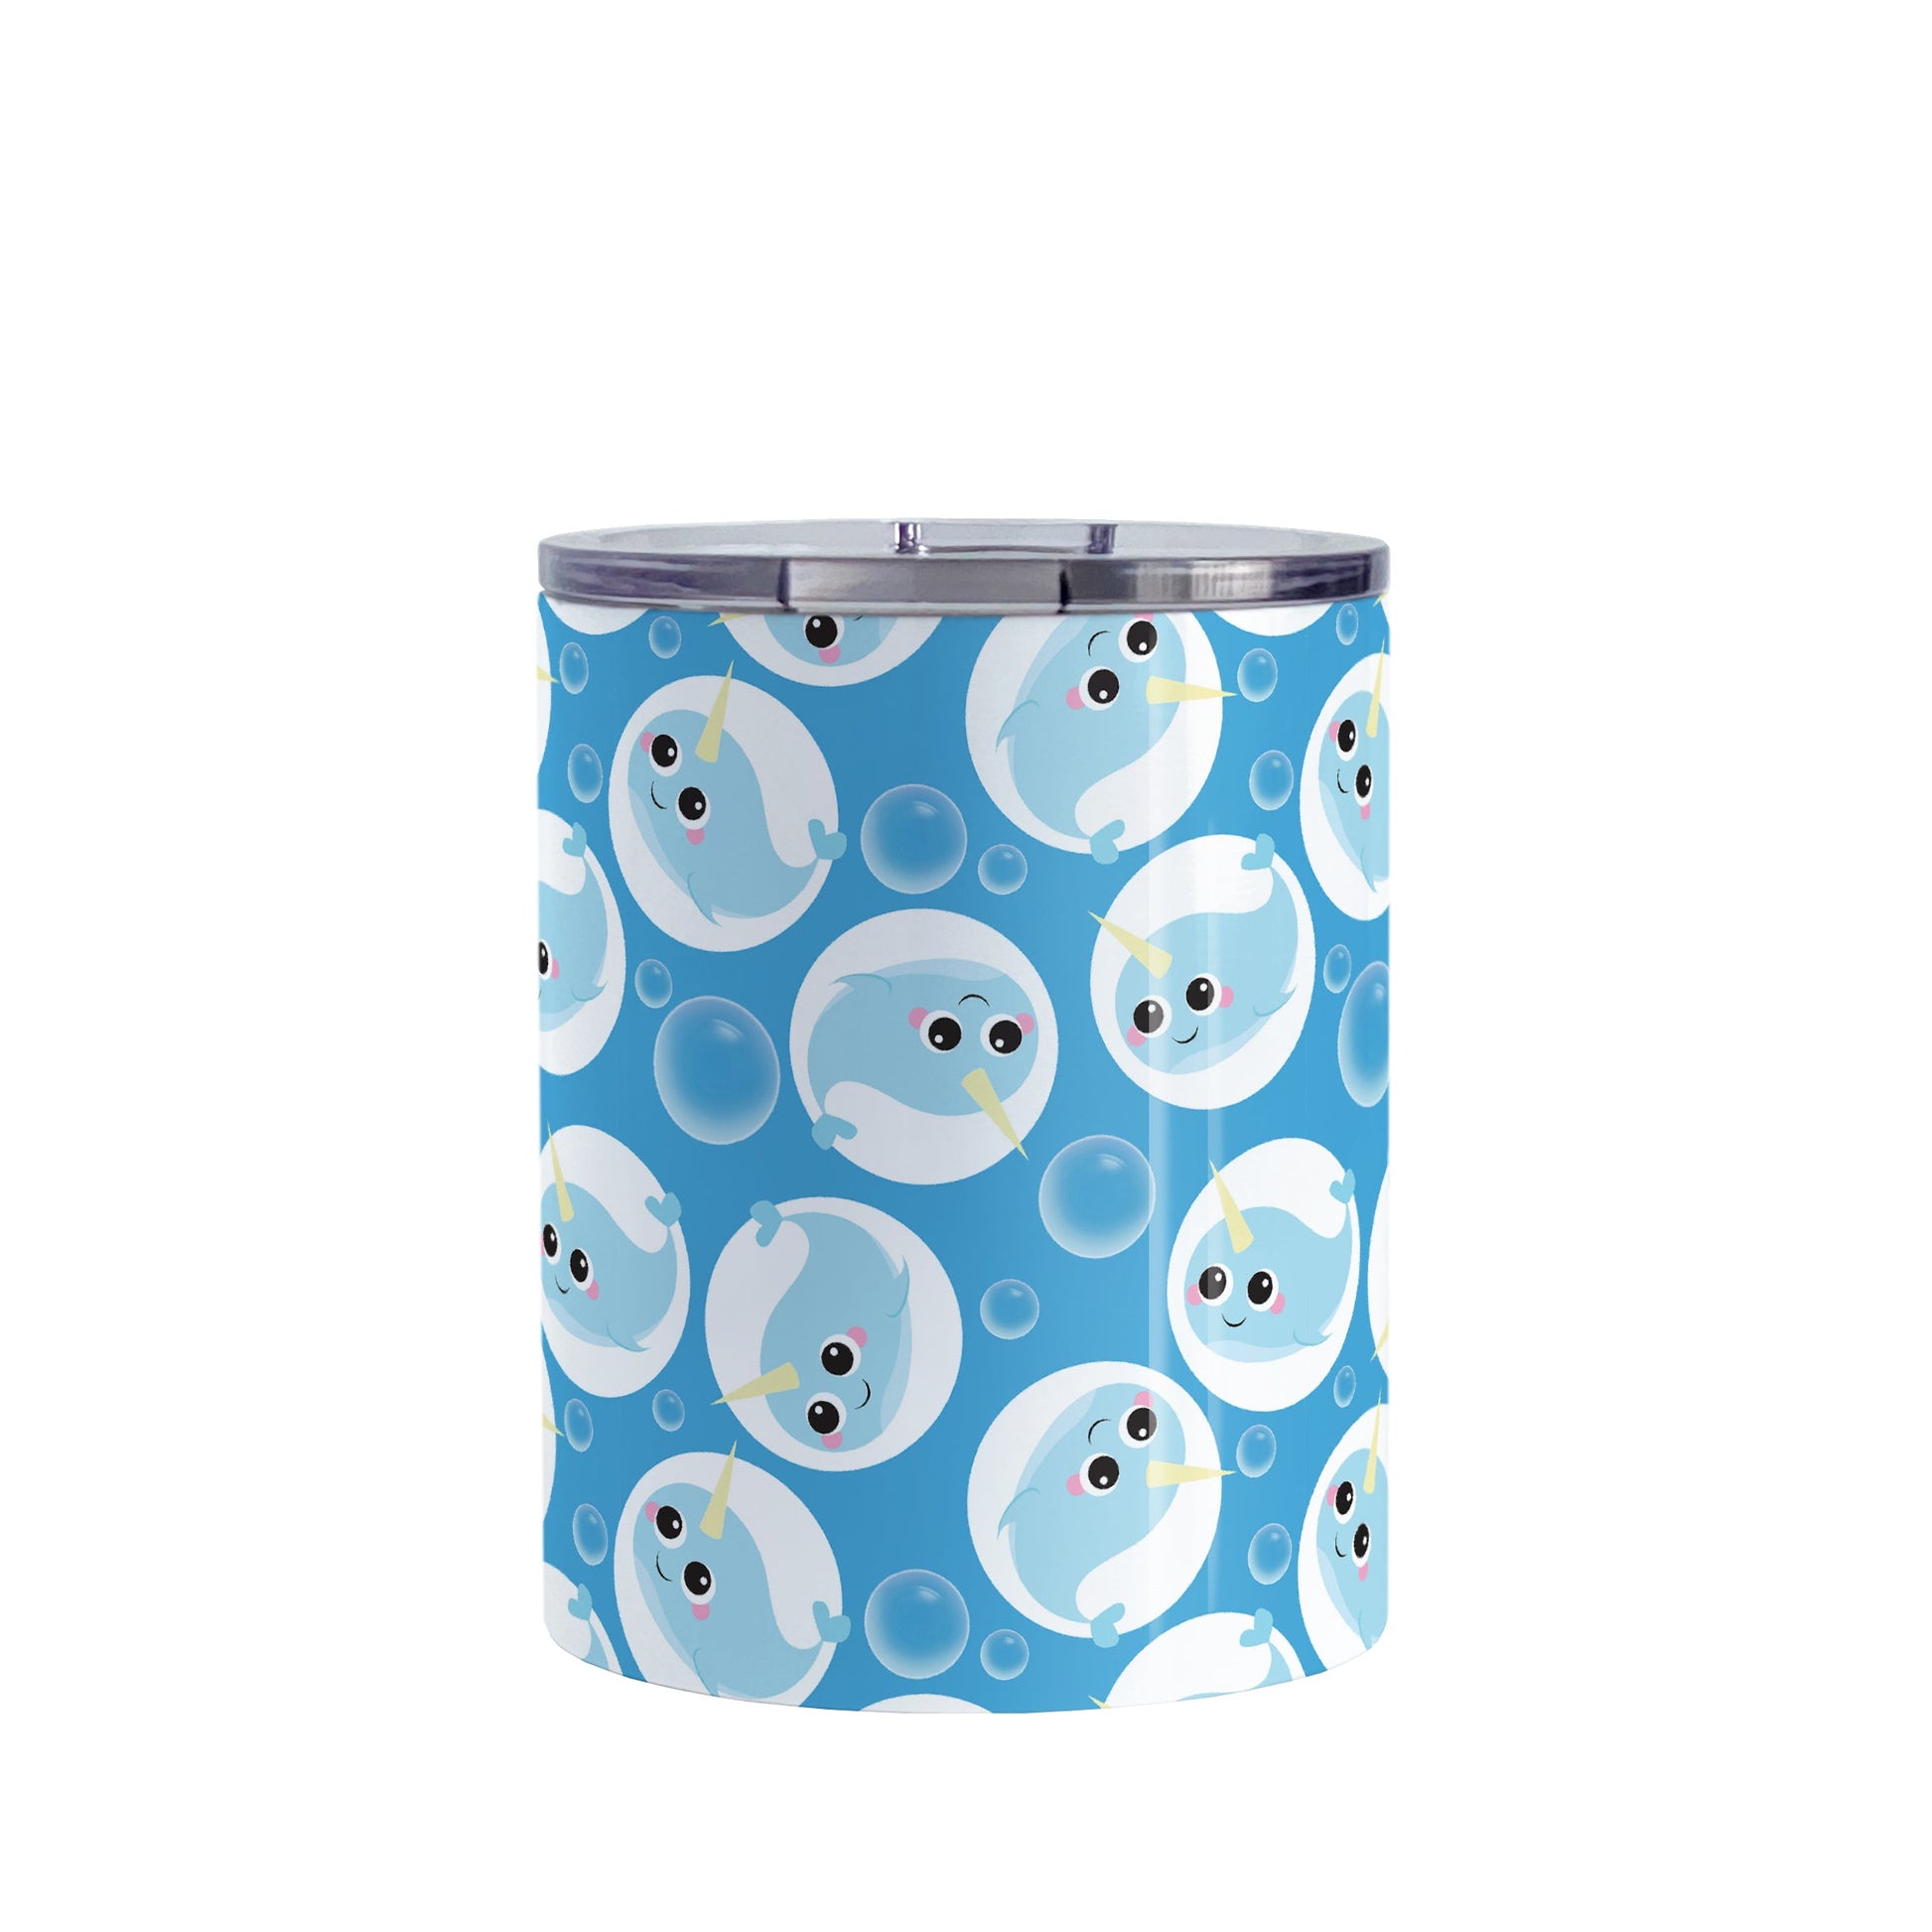 Cute Blue Narwhal Bubble Pattern Tumbler Cup (10oz, stainless steel insulated) at Amy's Coffee Mugs